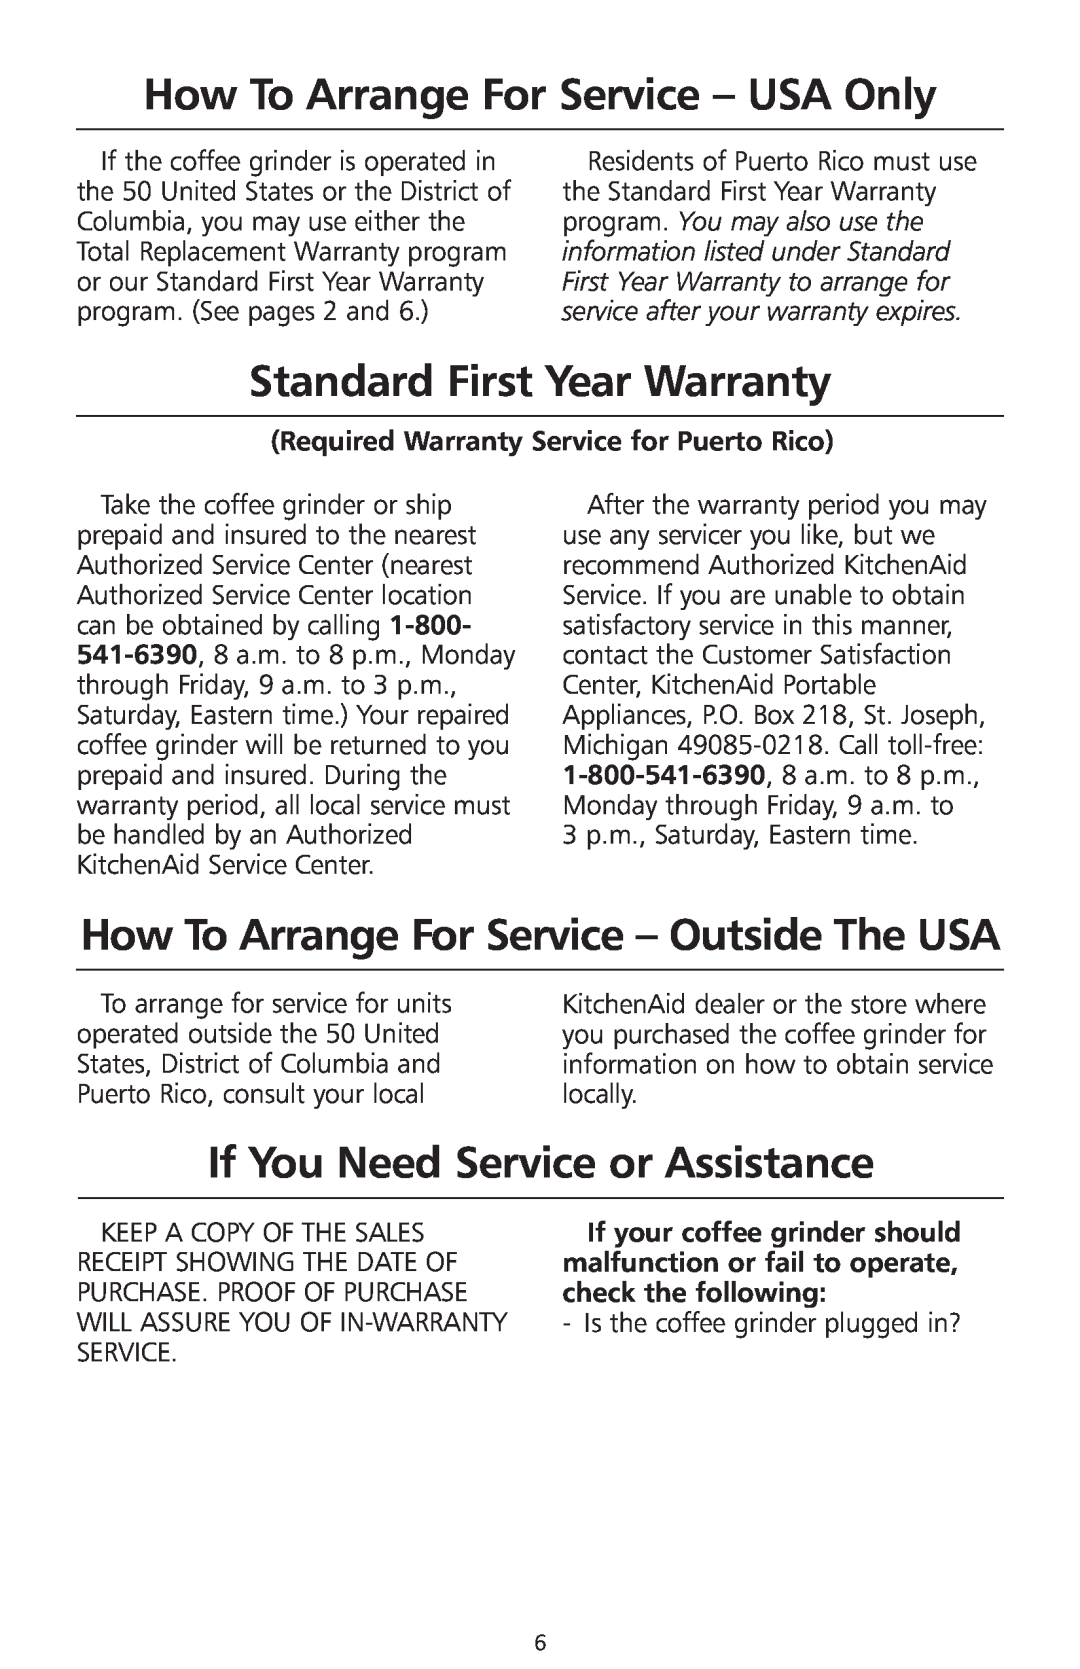 KitchenAid 2633 How To Arrange For Service - USA Only, Standard First Year Warranty, If You Need Service or Assistance 